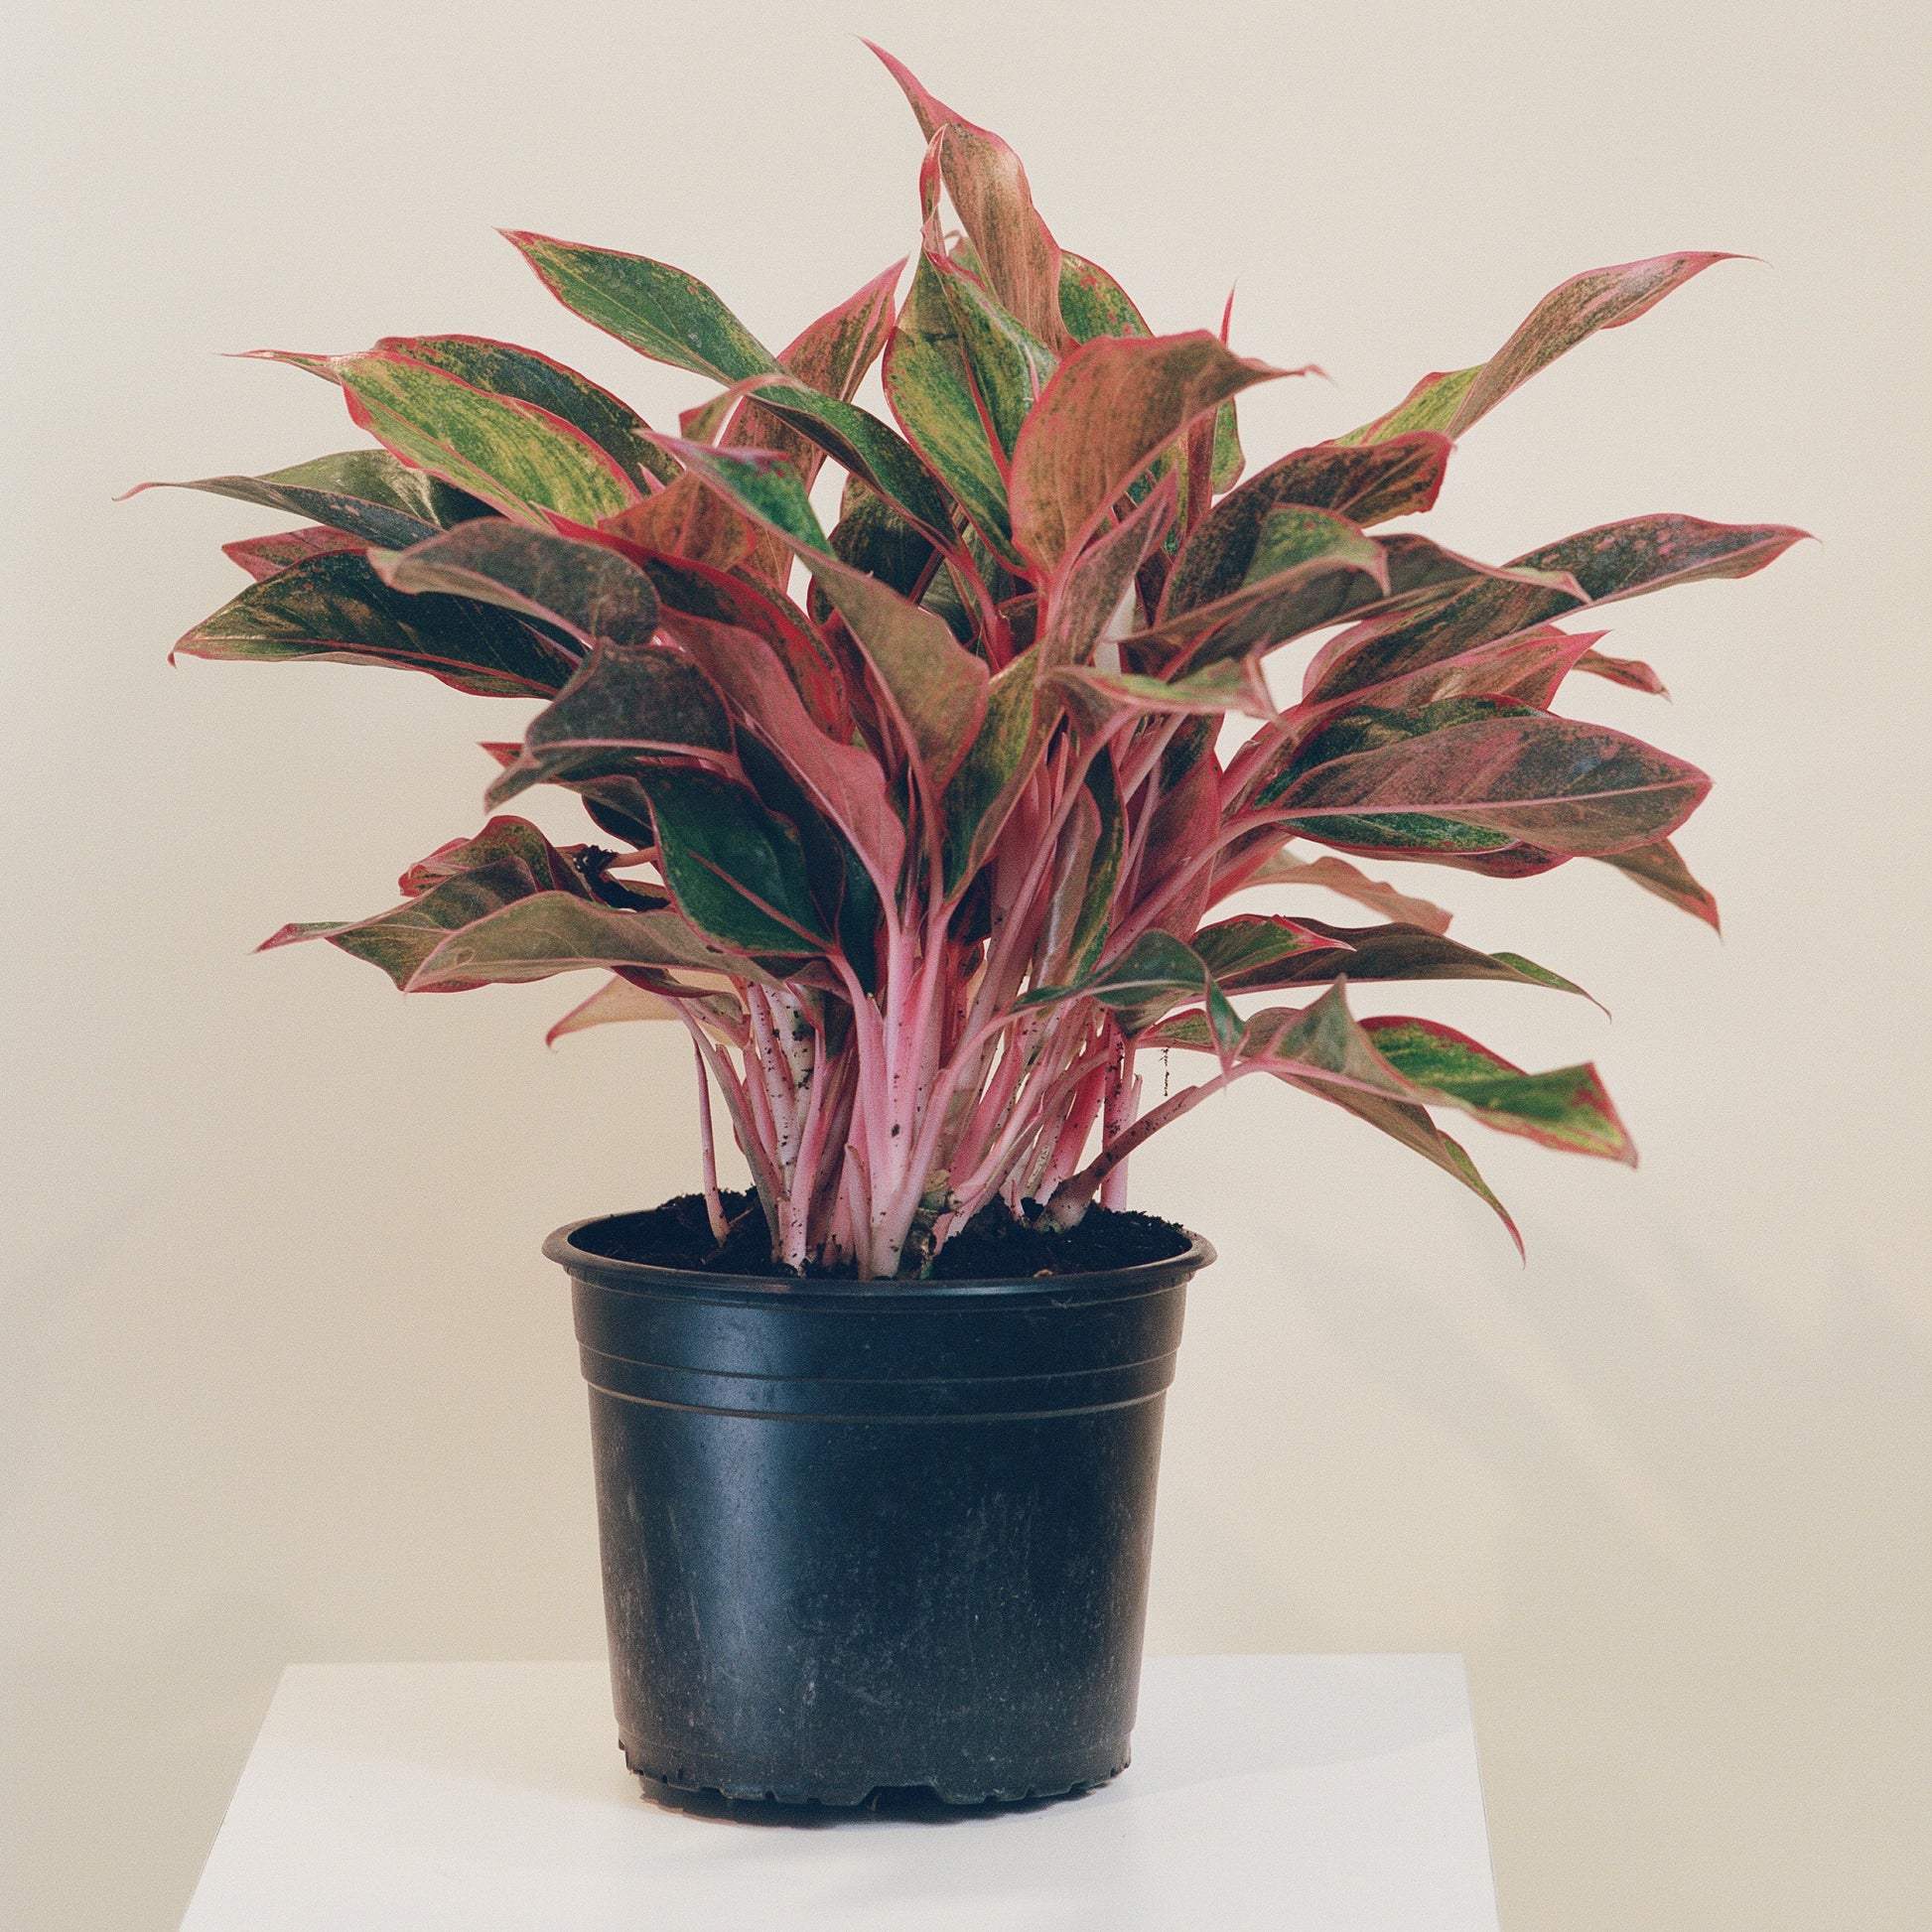 Chinese Evergreen (Aglaonema 'Siam Red Gold') in a 8 inch pot. Indoor plant for sale by Promise Supply for delivery and pickup in Toronto